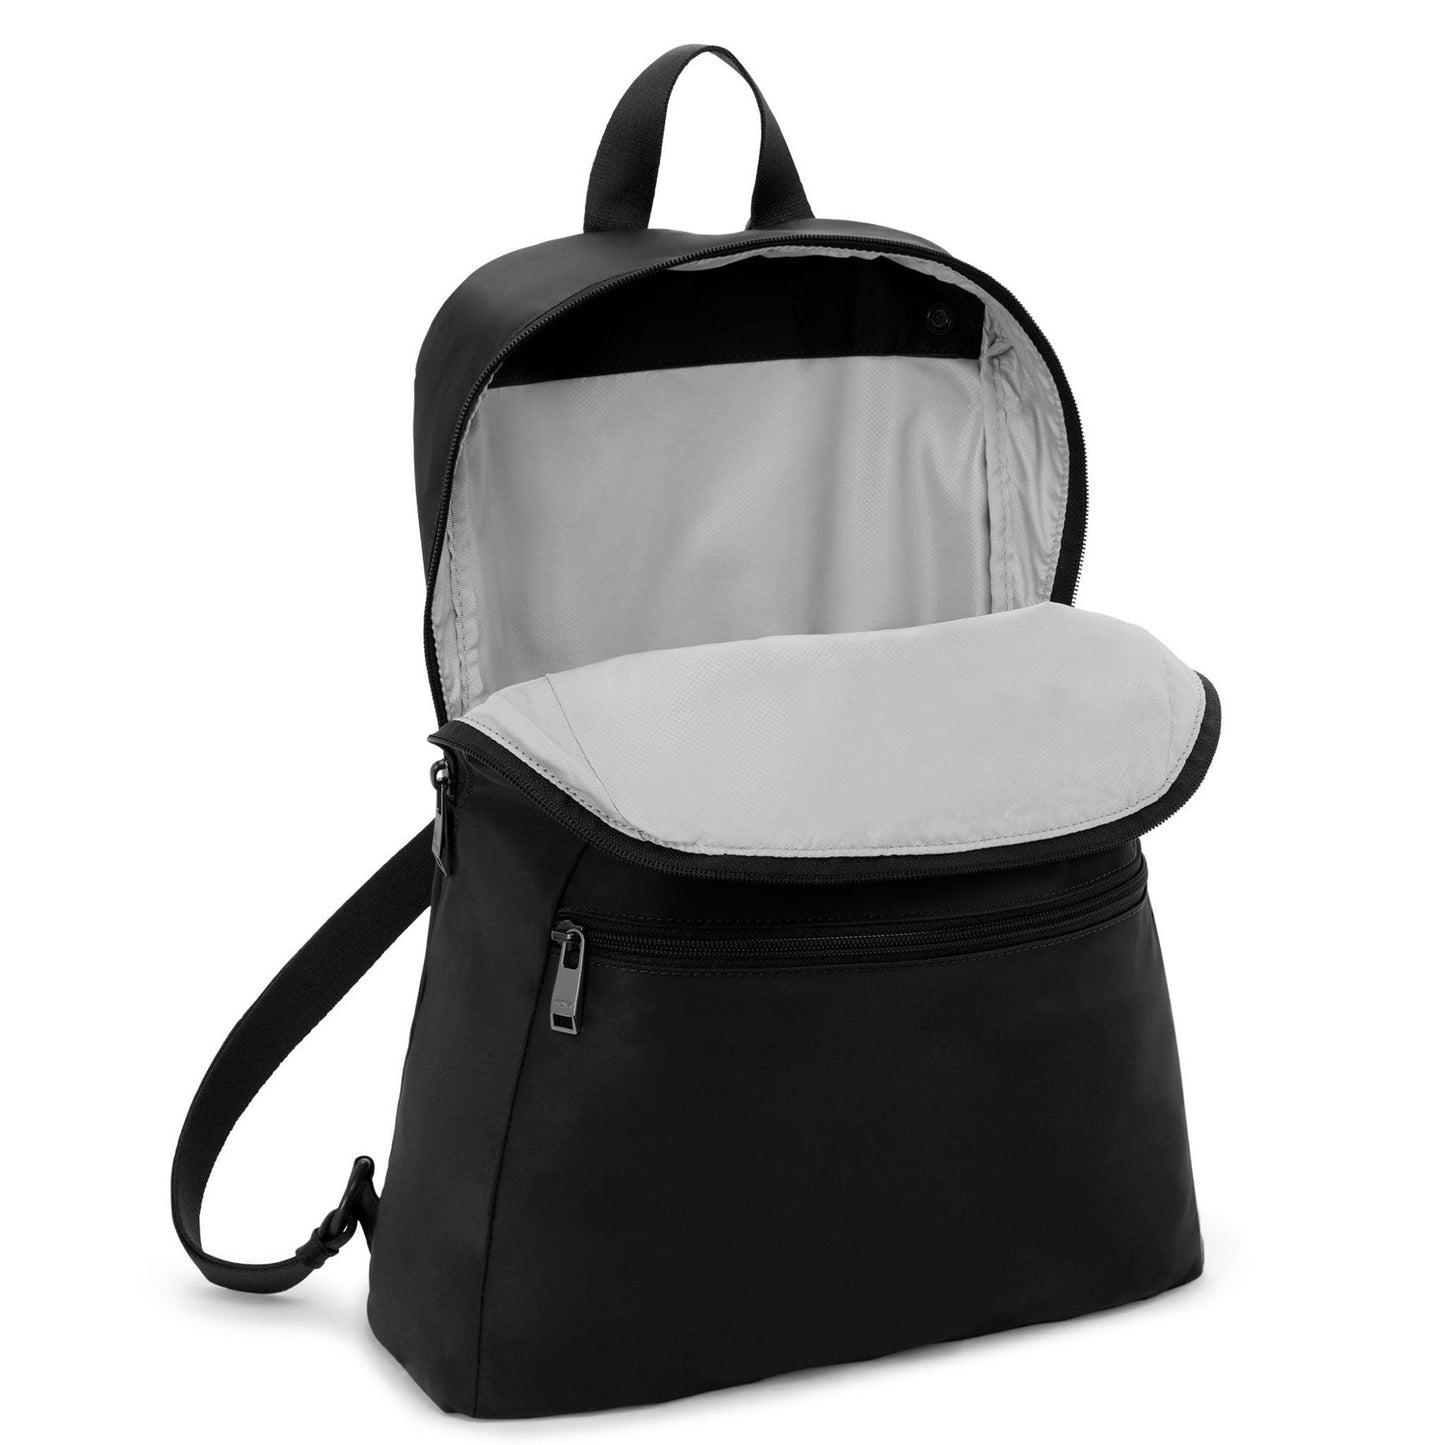 Just In Case® Backpack - Black/Gunmetal - Cosmos Boutique New Jersey